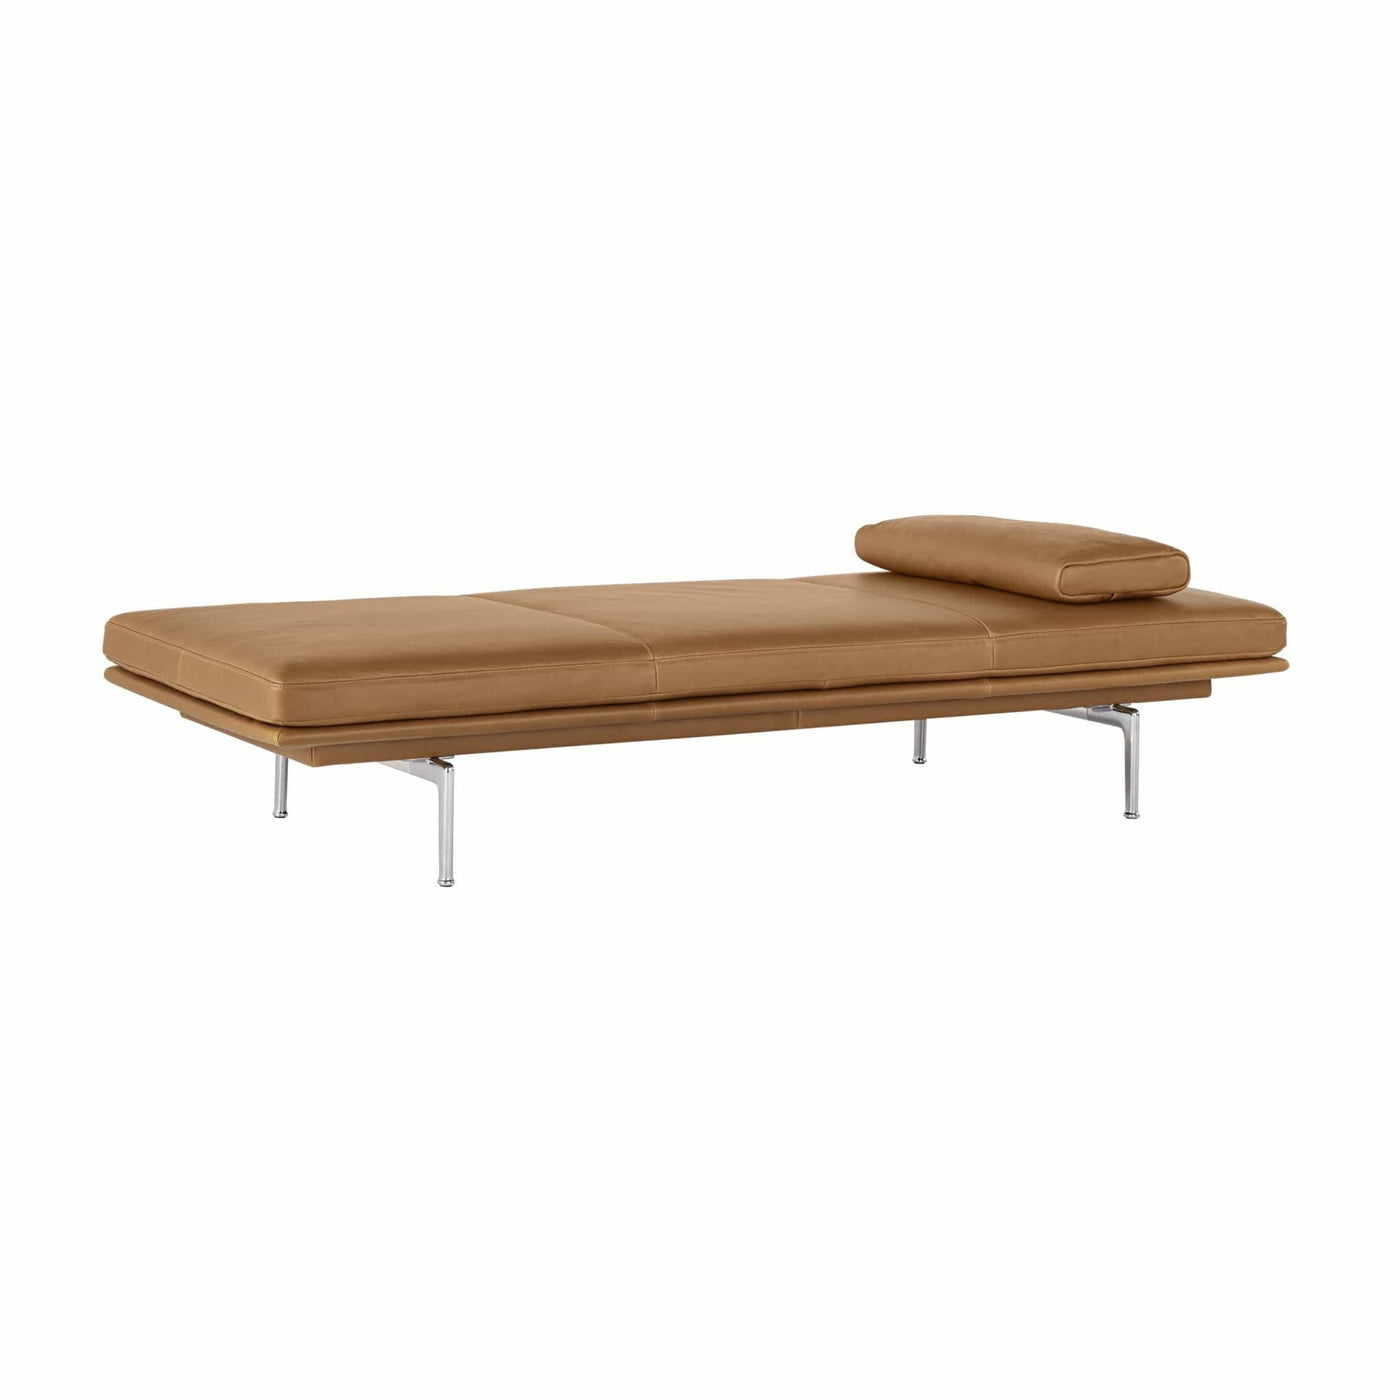 Muuto Outline Daybed in cognac refine leather and polished aluminium base. Made to order from someday designs. #colour_cognac-refine-leather